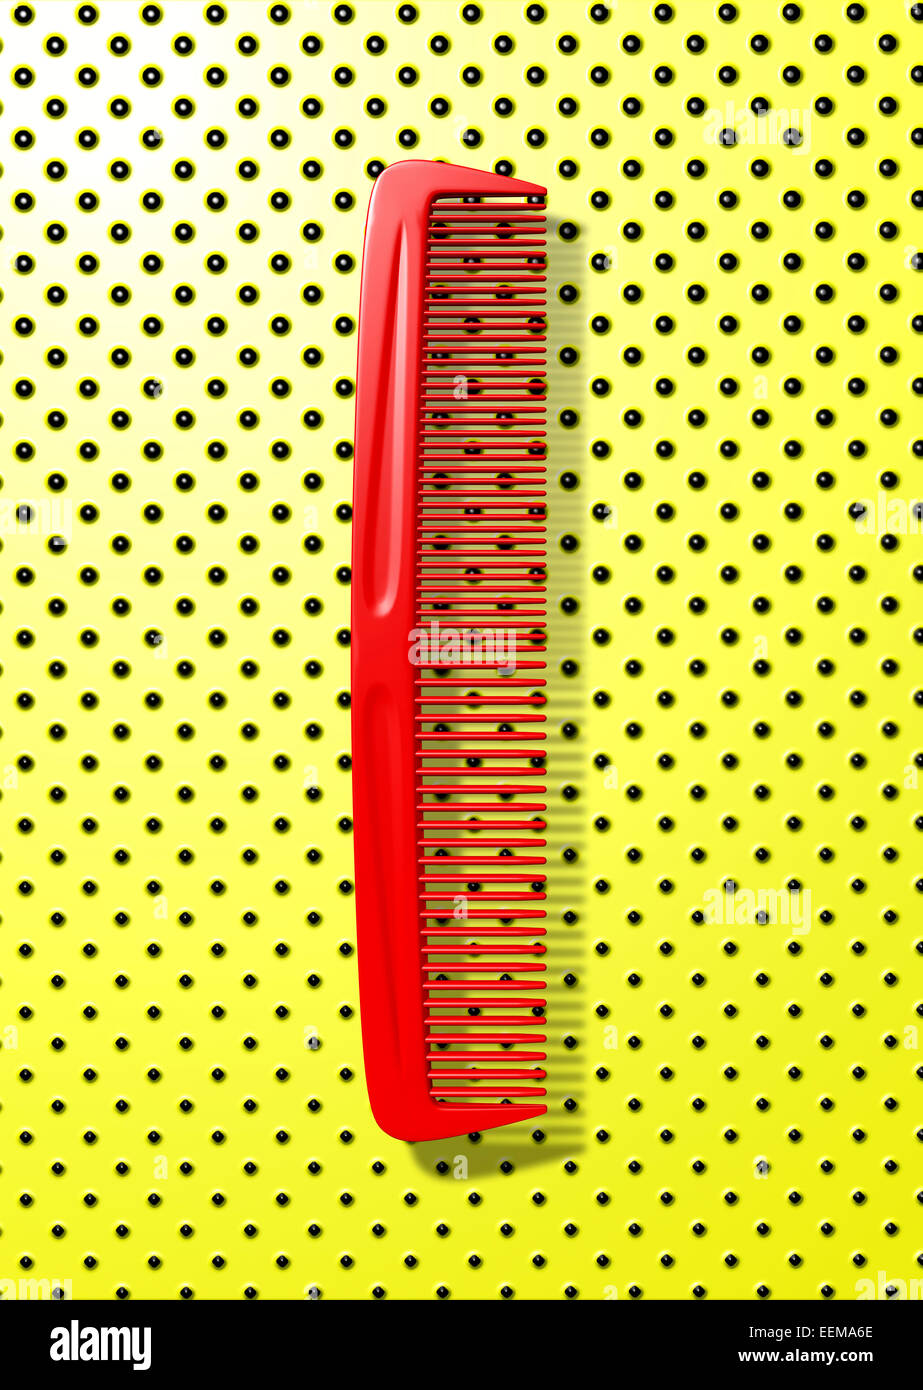 Close up of red comb on polka dot background Stock Photo